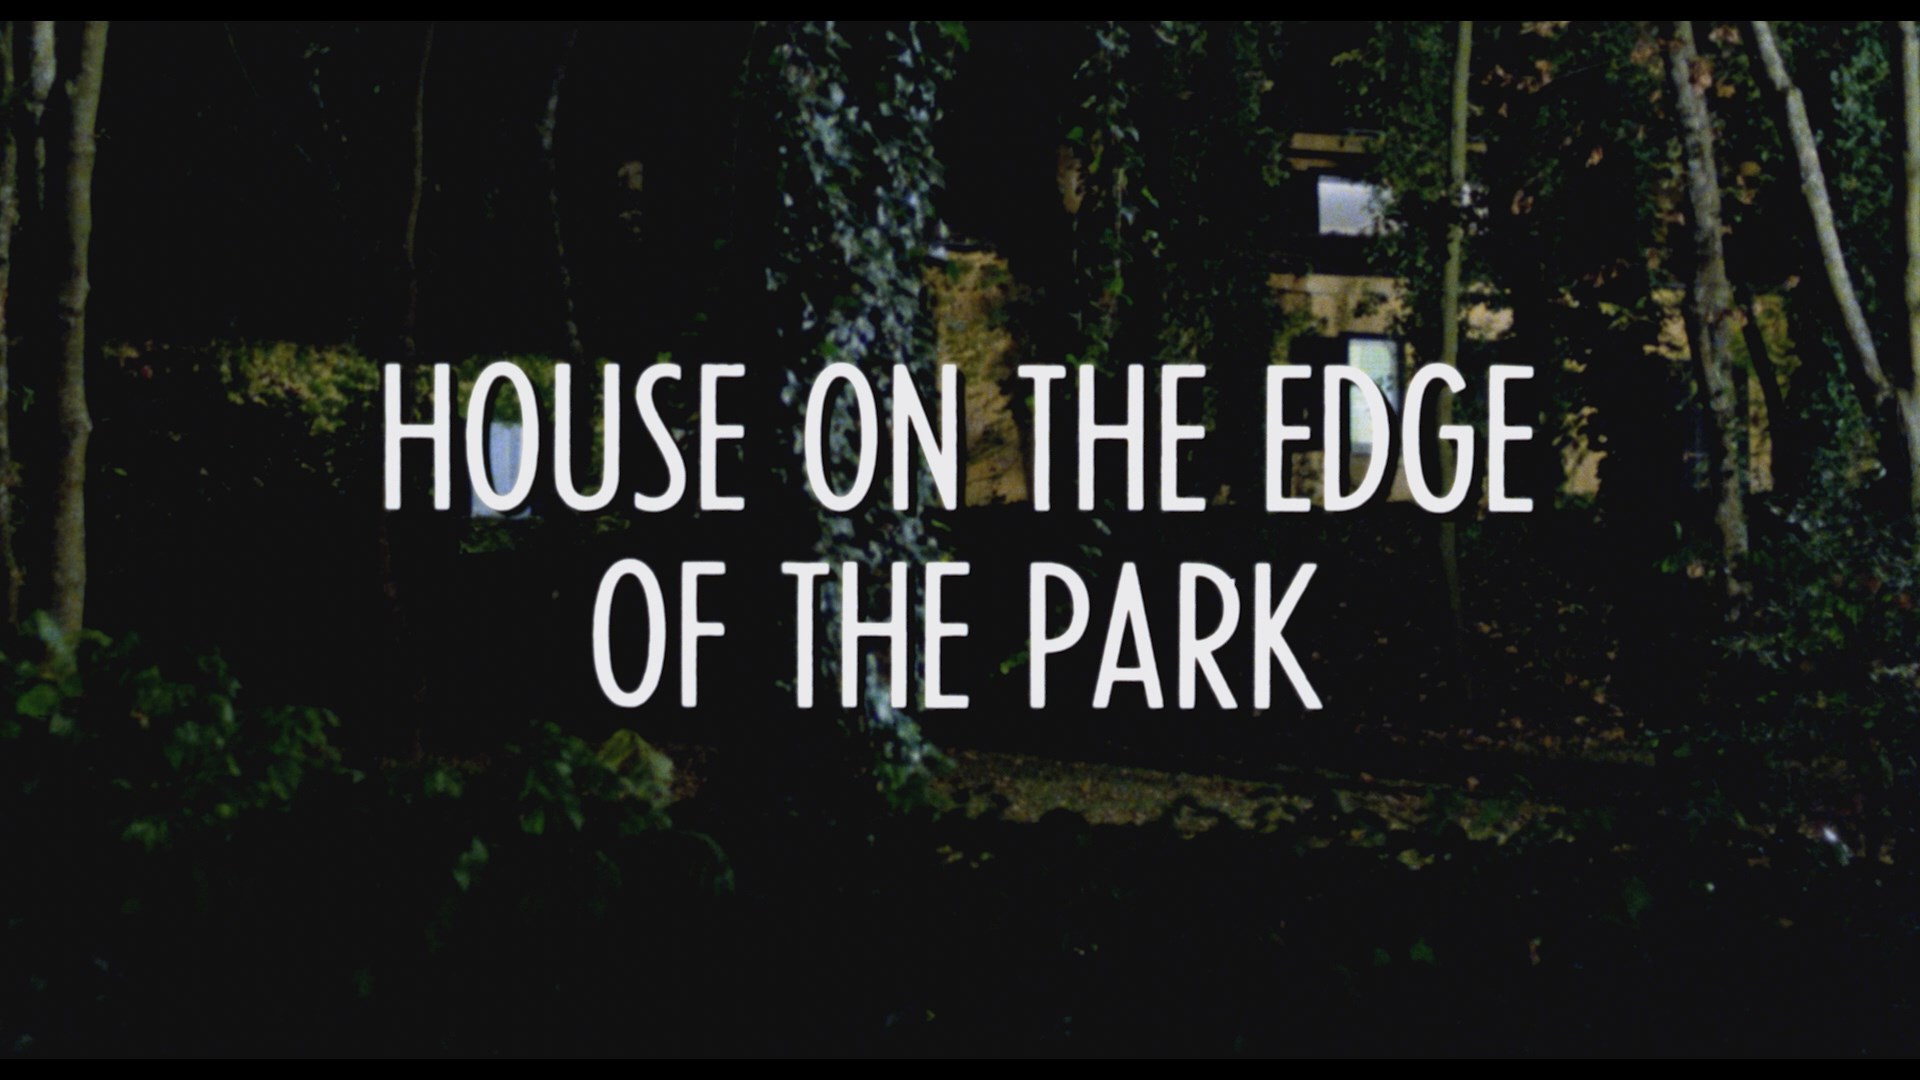 House on the Edge of the Park